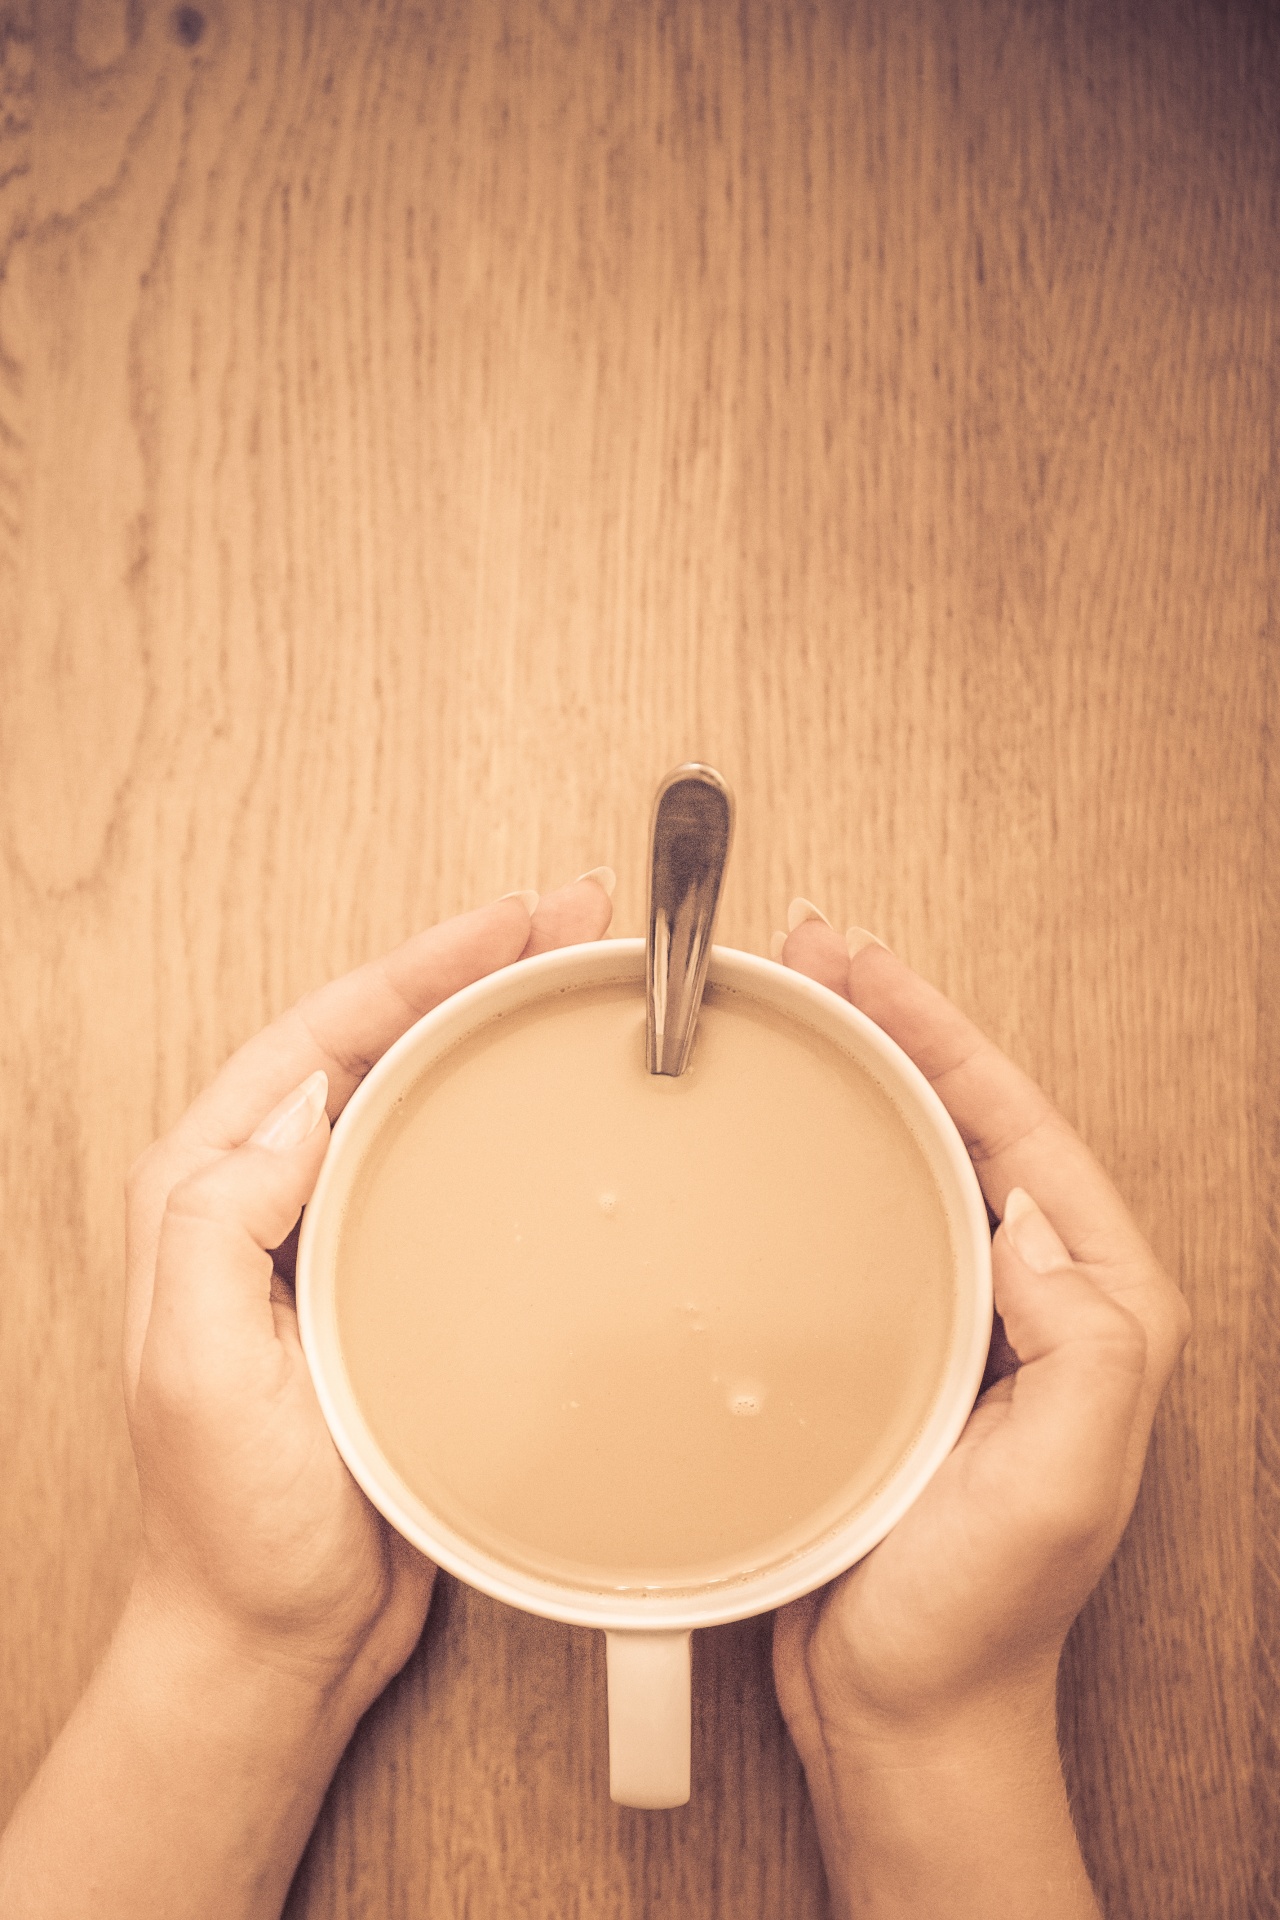 Hands Holding A Cup Of Coffee